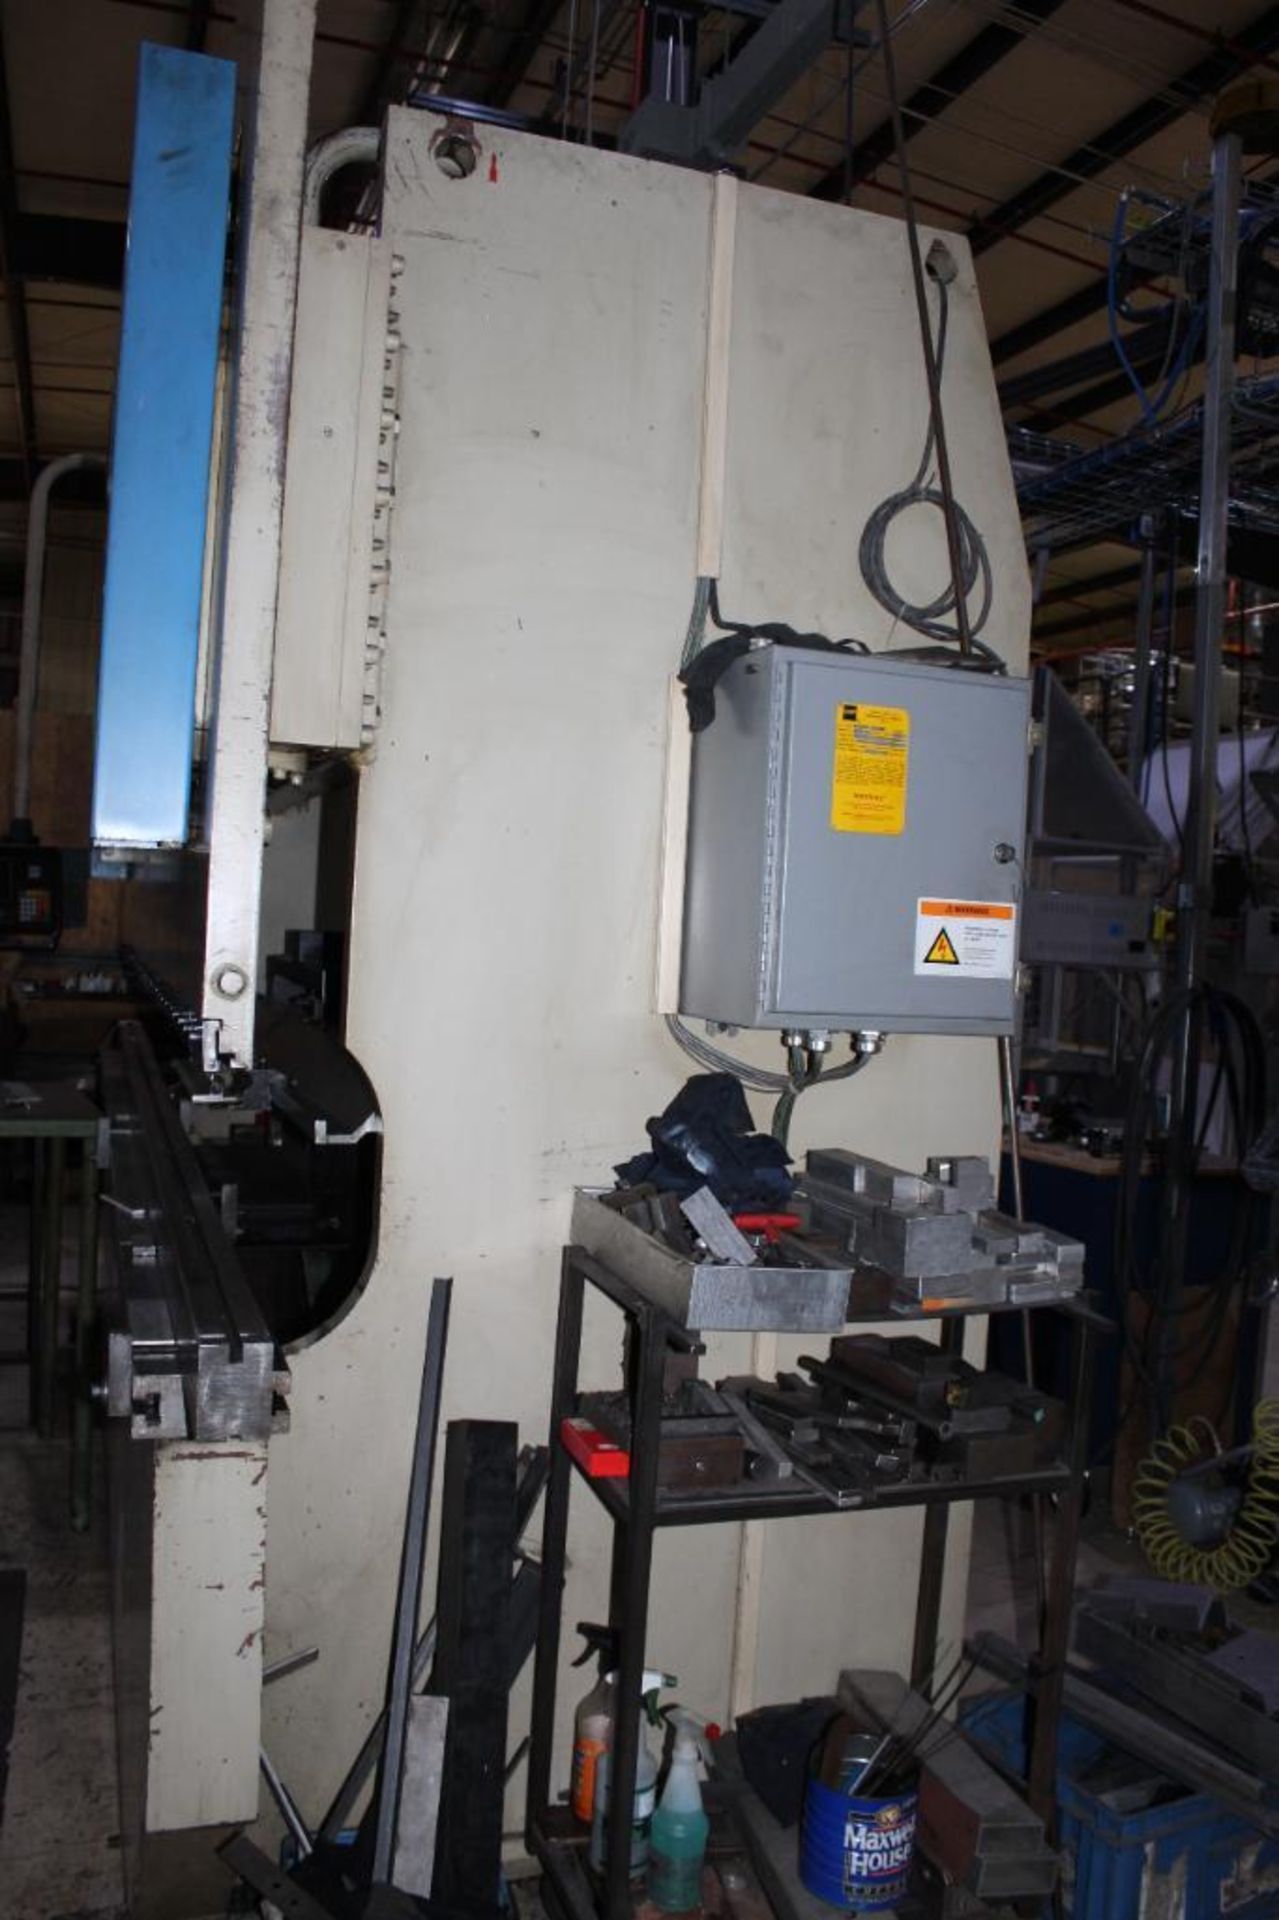 1995 LVD Hydraulic Press Brake Model 180JS13 Equipped With Hurco AutoBend 7 CNC Back Gage - Image 6 of 22